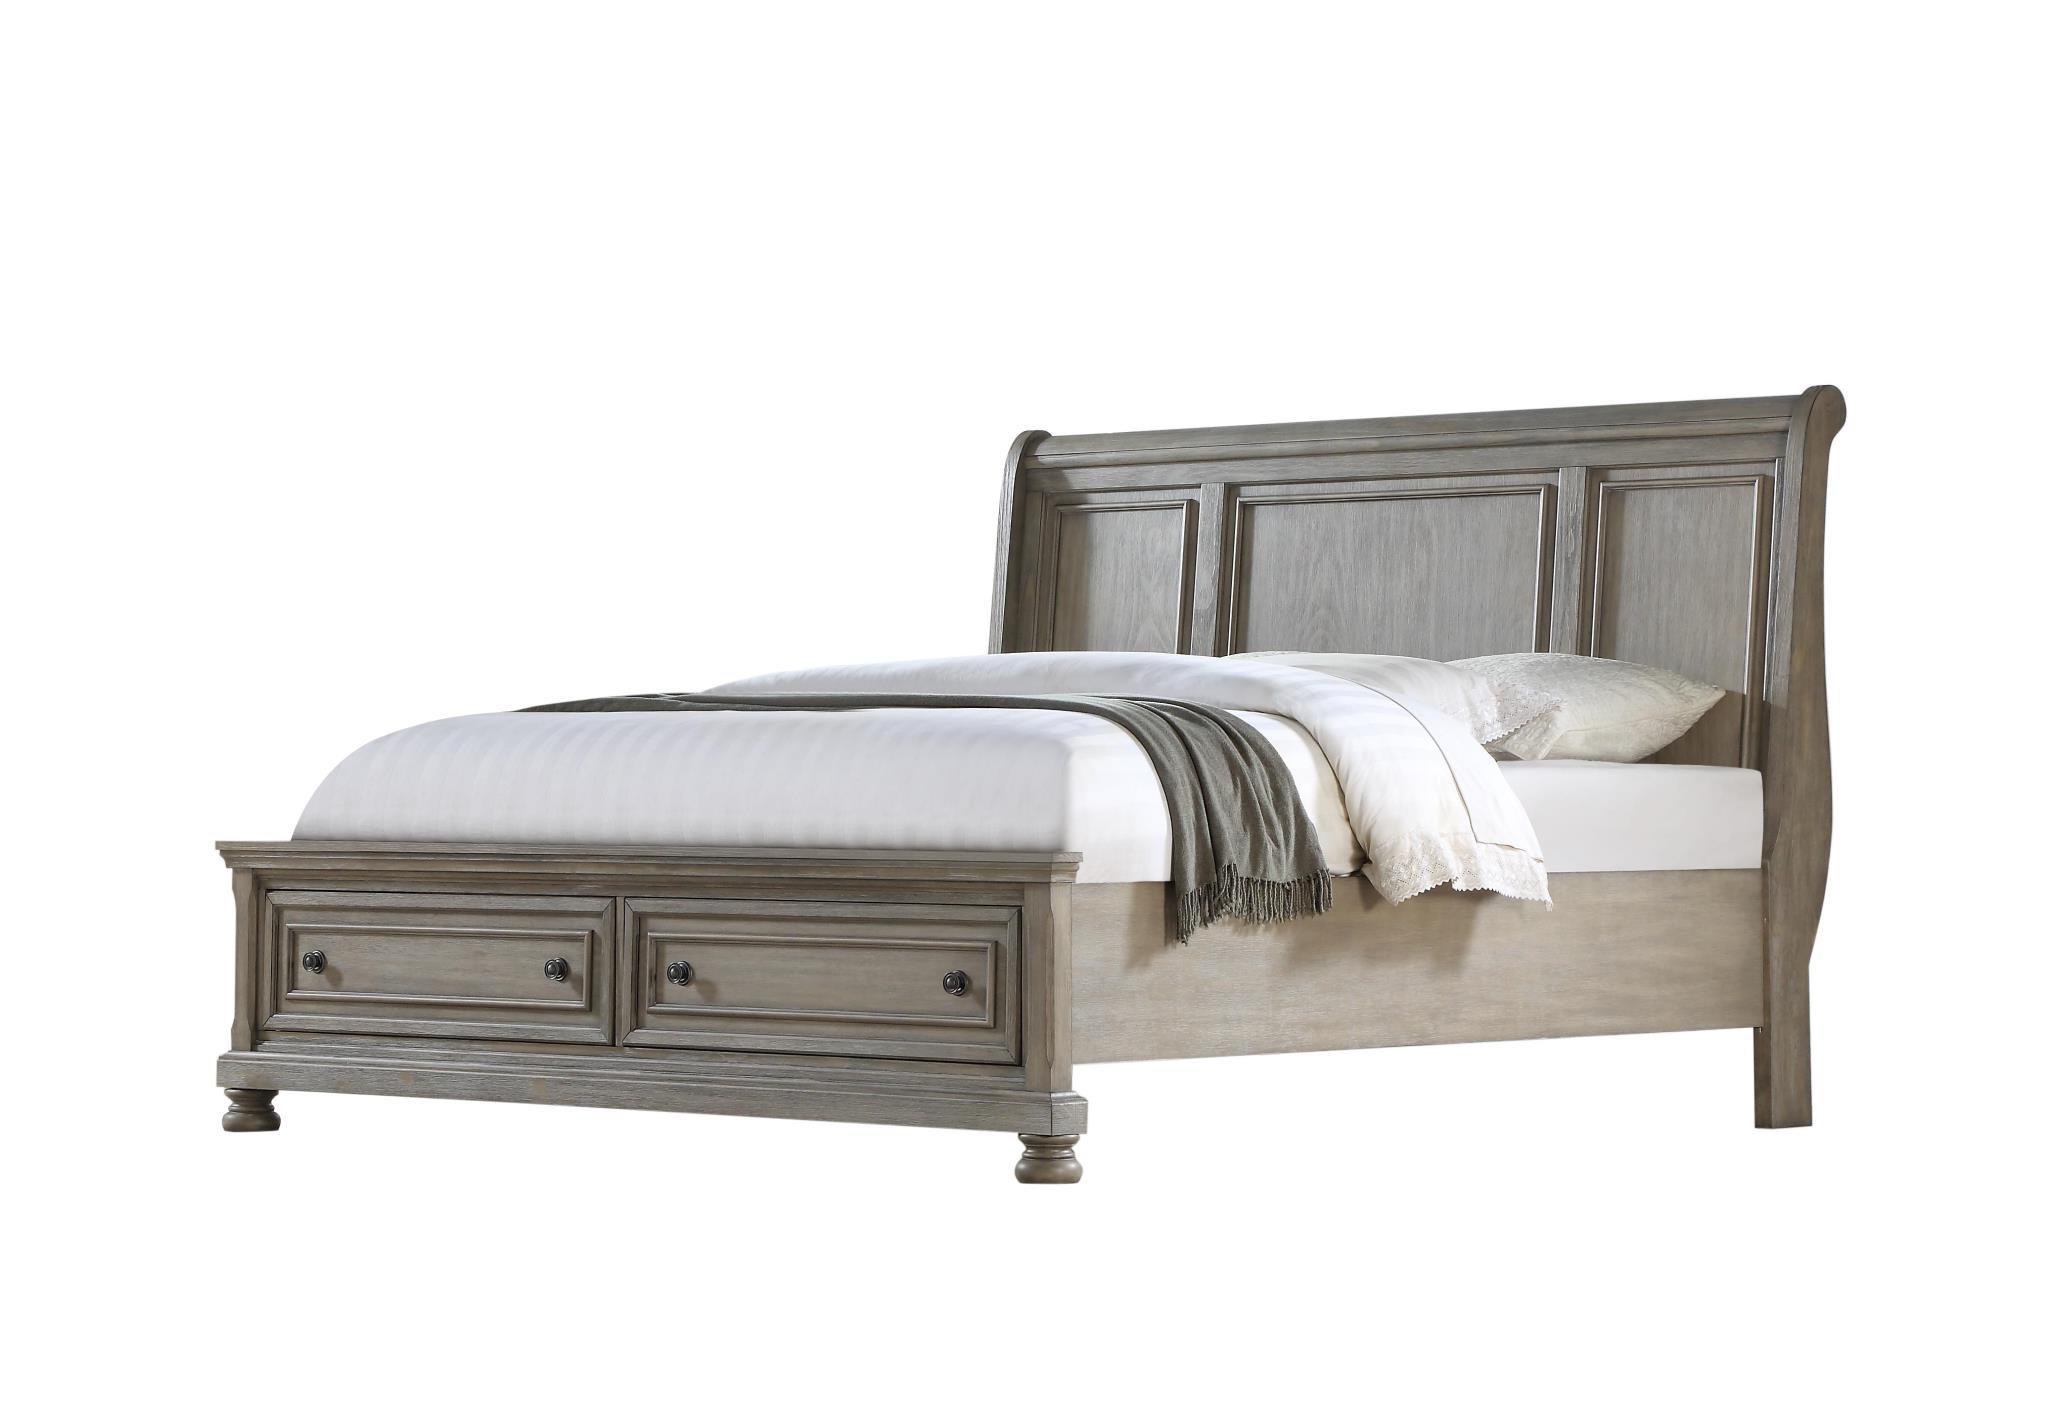 Traditional, Casual Storage Bed PRESCOTT 1070-110 1070-110 in Gray 